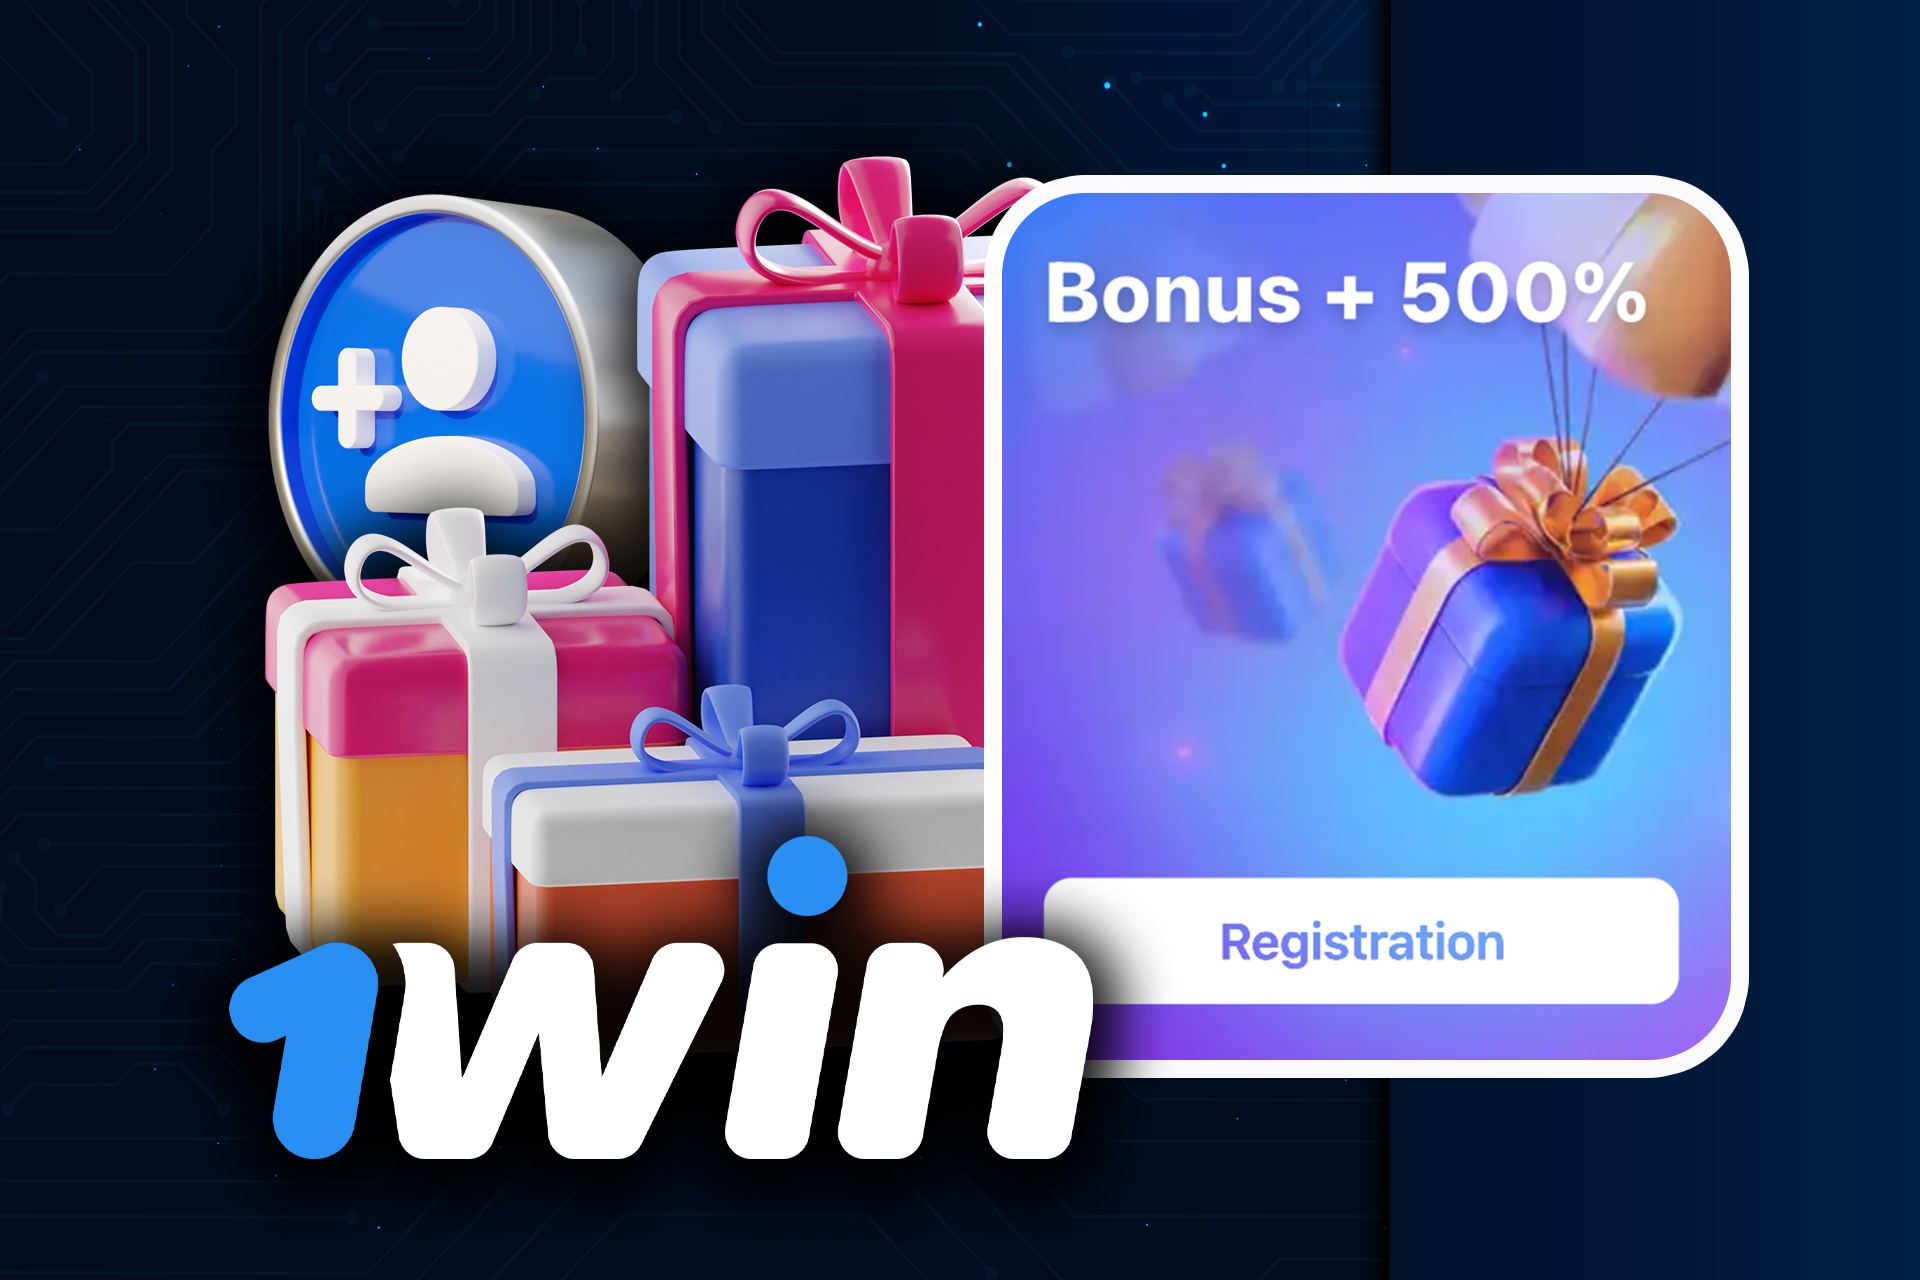 1win gives a 500% welcome bonus on your first deposit.